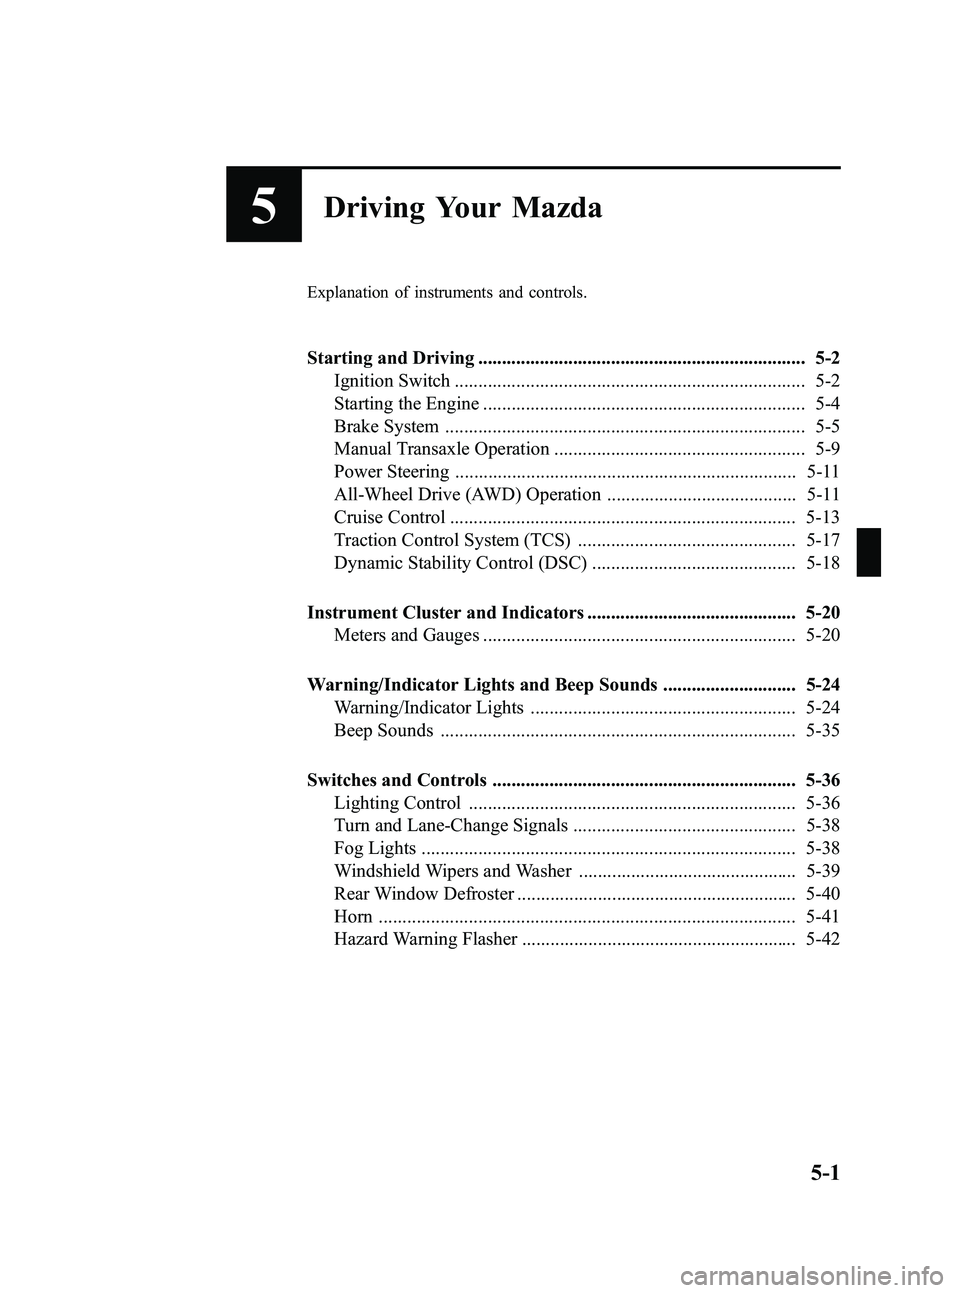 MAZDA MODEL SPEED 6 2006  Owners Manual Black plate (139,1)
5Driving Your Mazda
Explanation of instruments and controls.
Starting and Driving ..................................................................... 5-2Ignition Switch .........